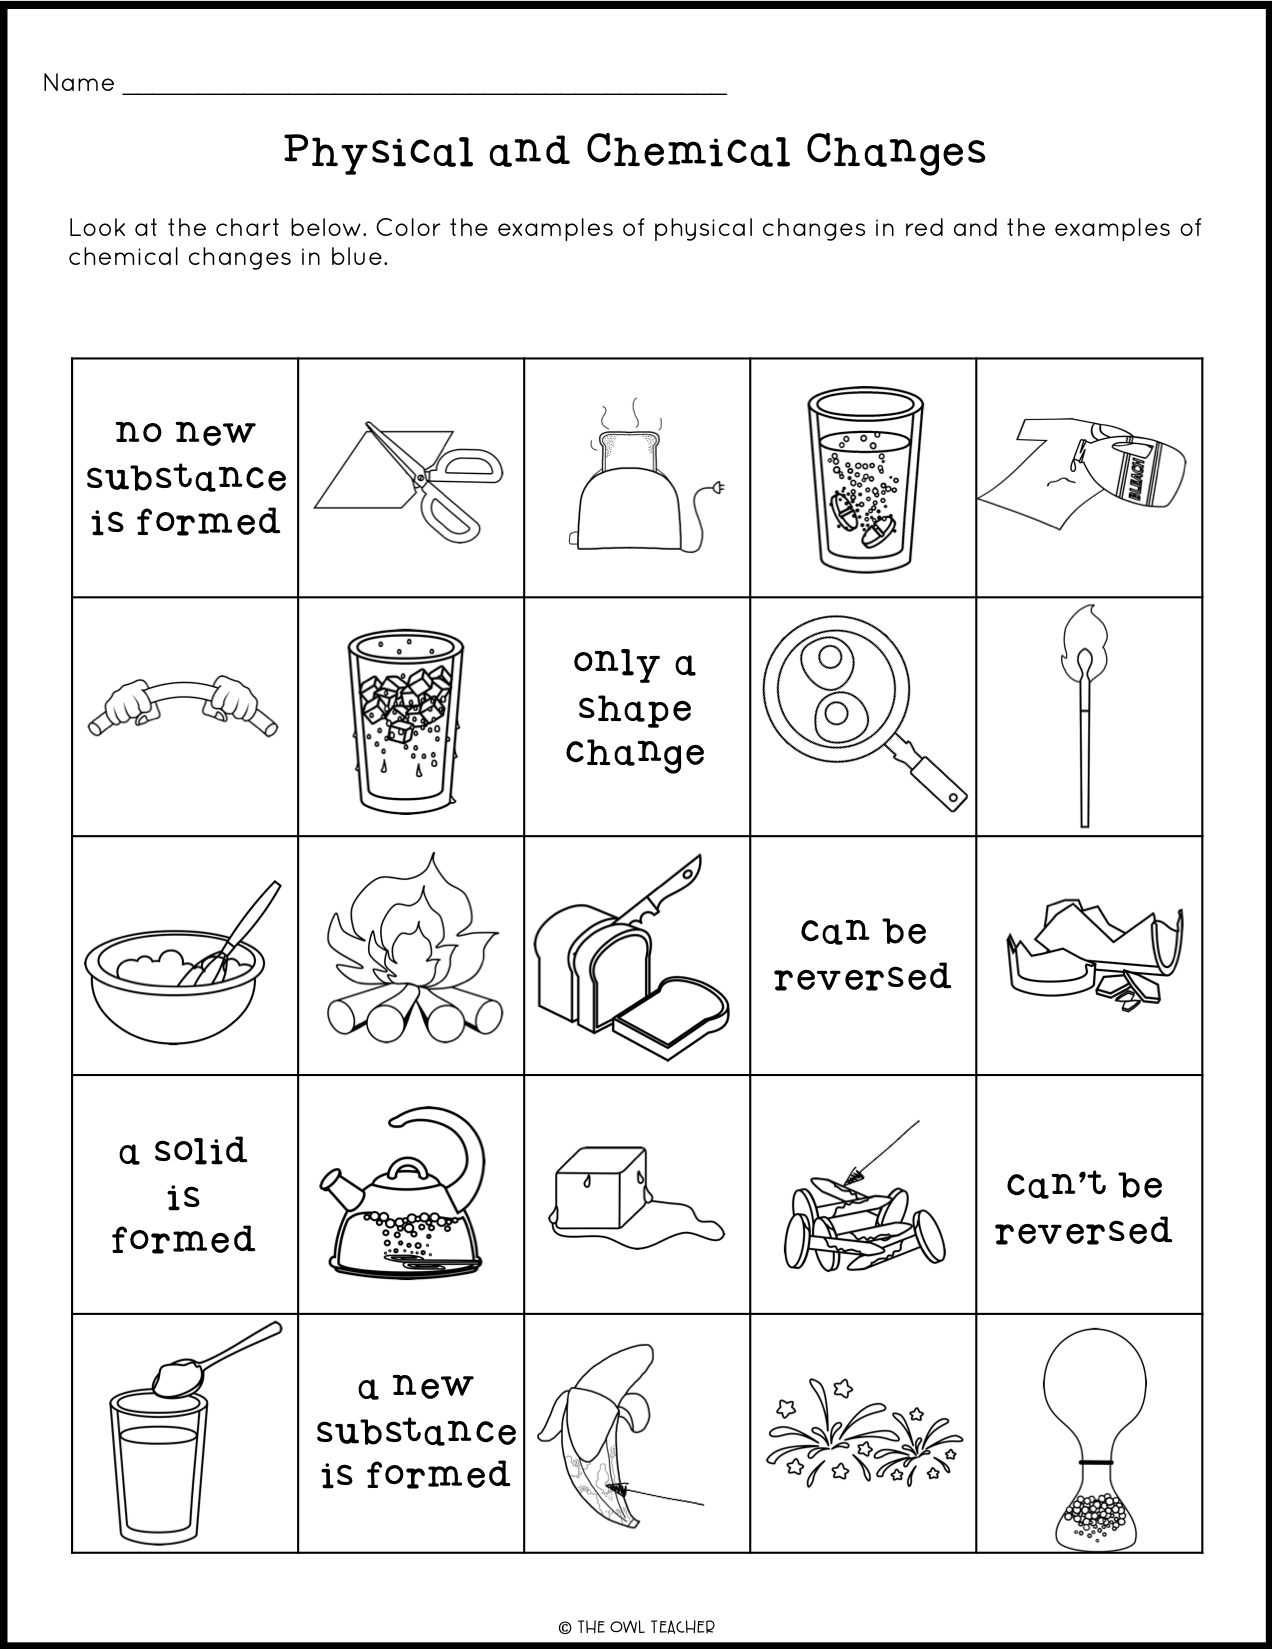 Physical and Chemical Changes Craftivity - The Owl Teacher Regarding Chemical And Physical Change Worksheet